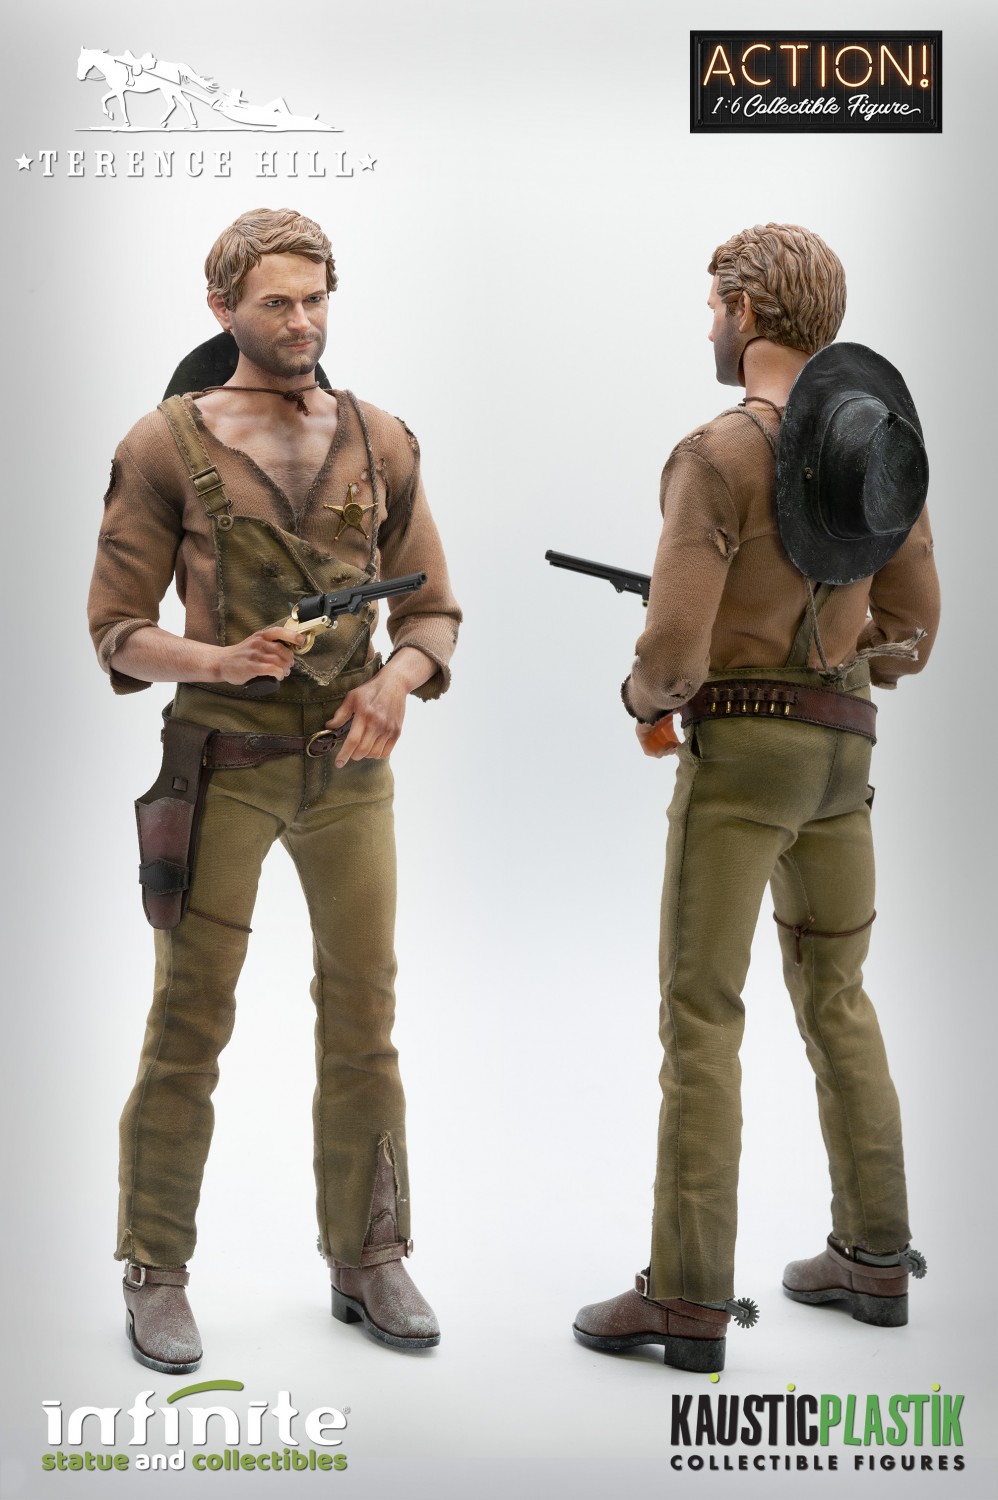 NEW PRODUCT: INFINITE STATUE & KAUSTIC PLASTIK TERENCE HILL 1/6 ACTION - REGULAR, DELUXE, EXCLUSIVE, DIORAMA Terence-hill-16-action-figure-regular-edition